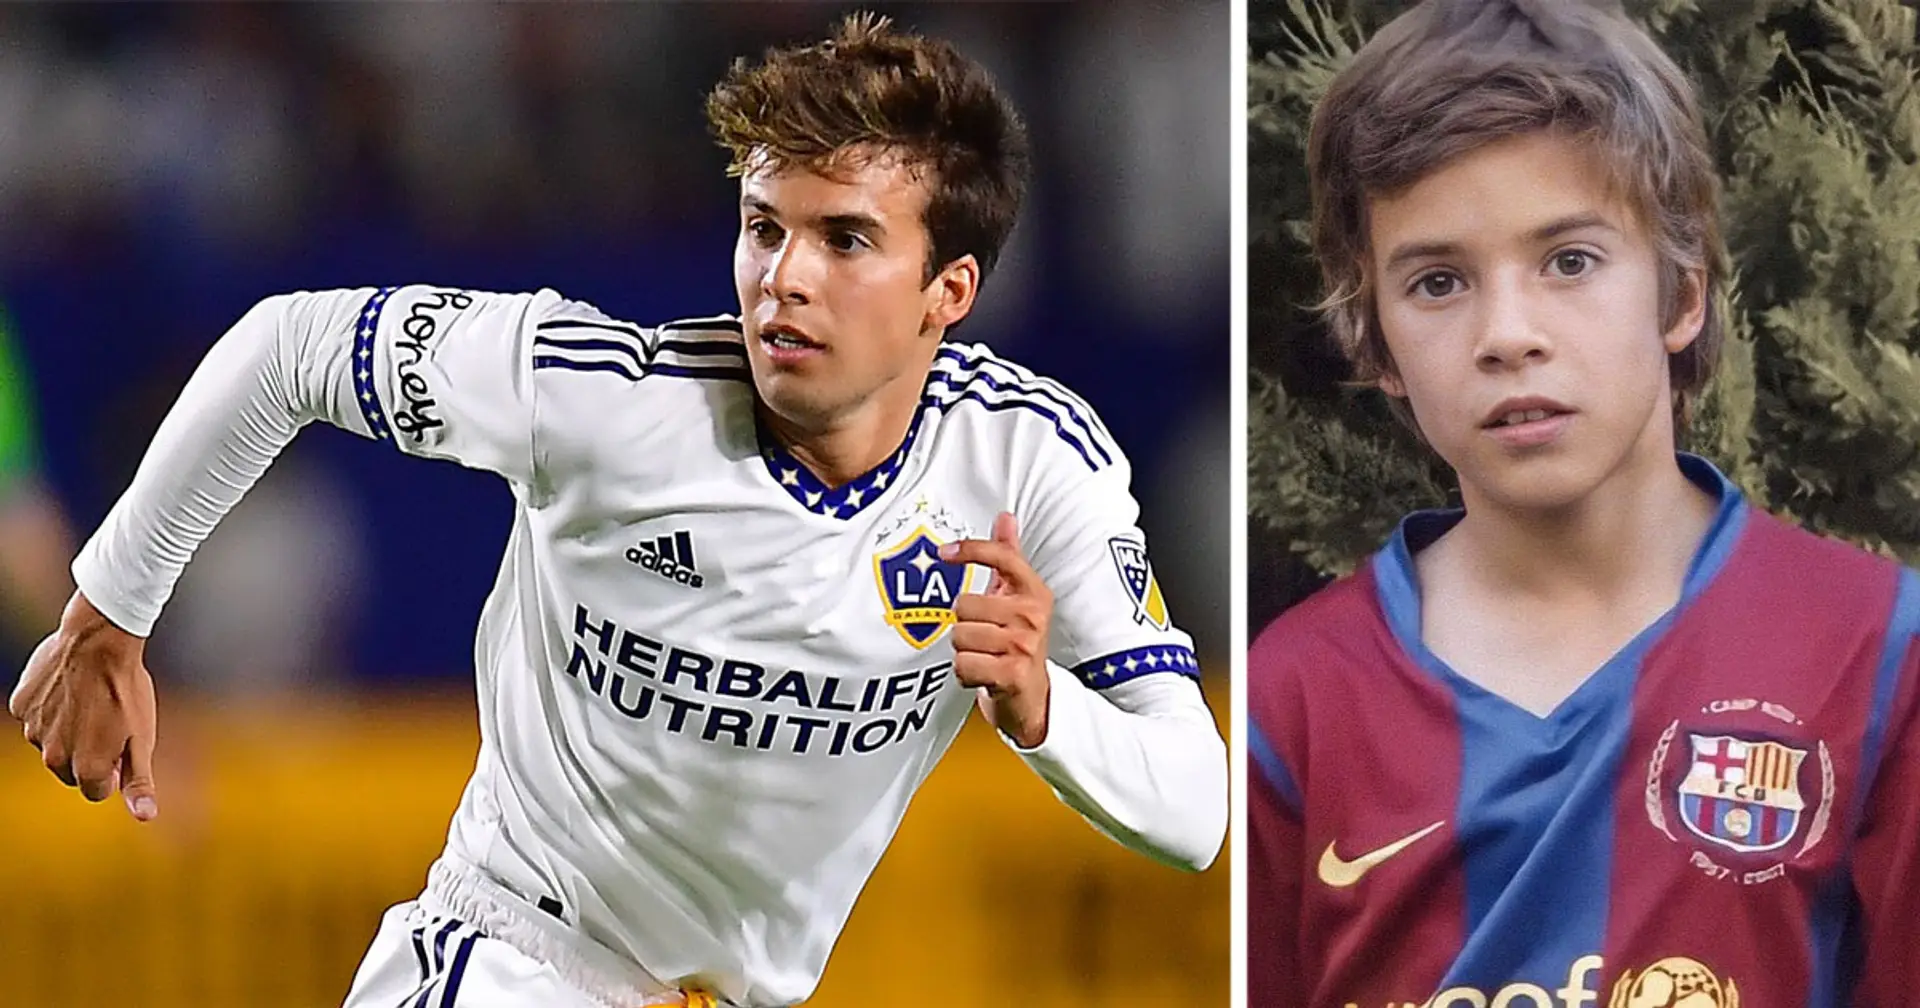 How did Riqui Puig do in his first season away from Barca? Answered